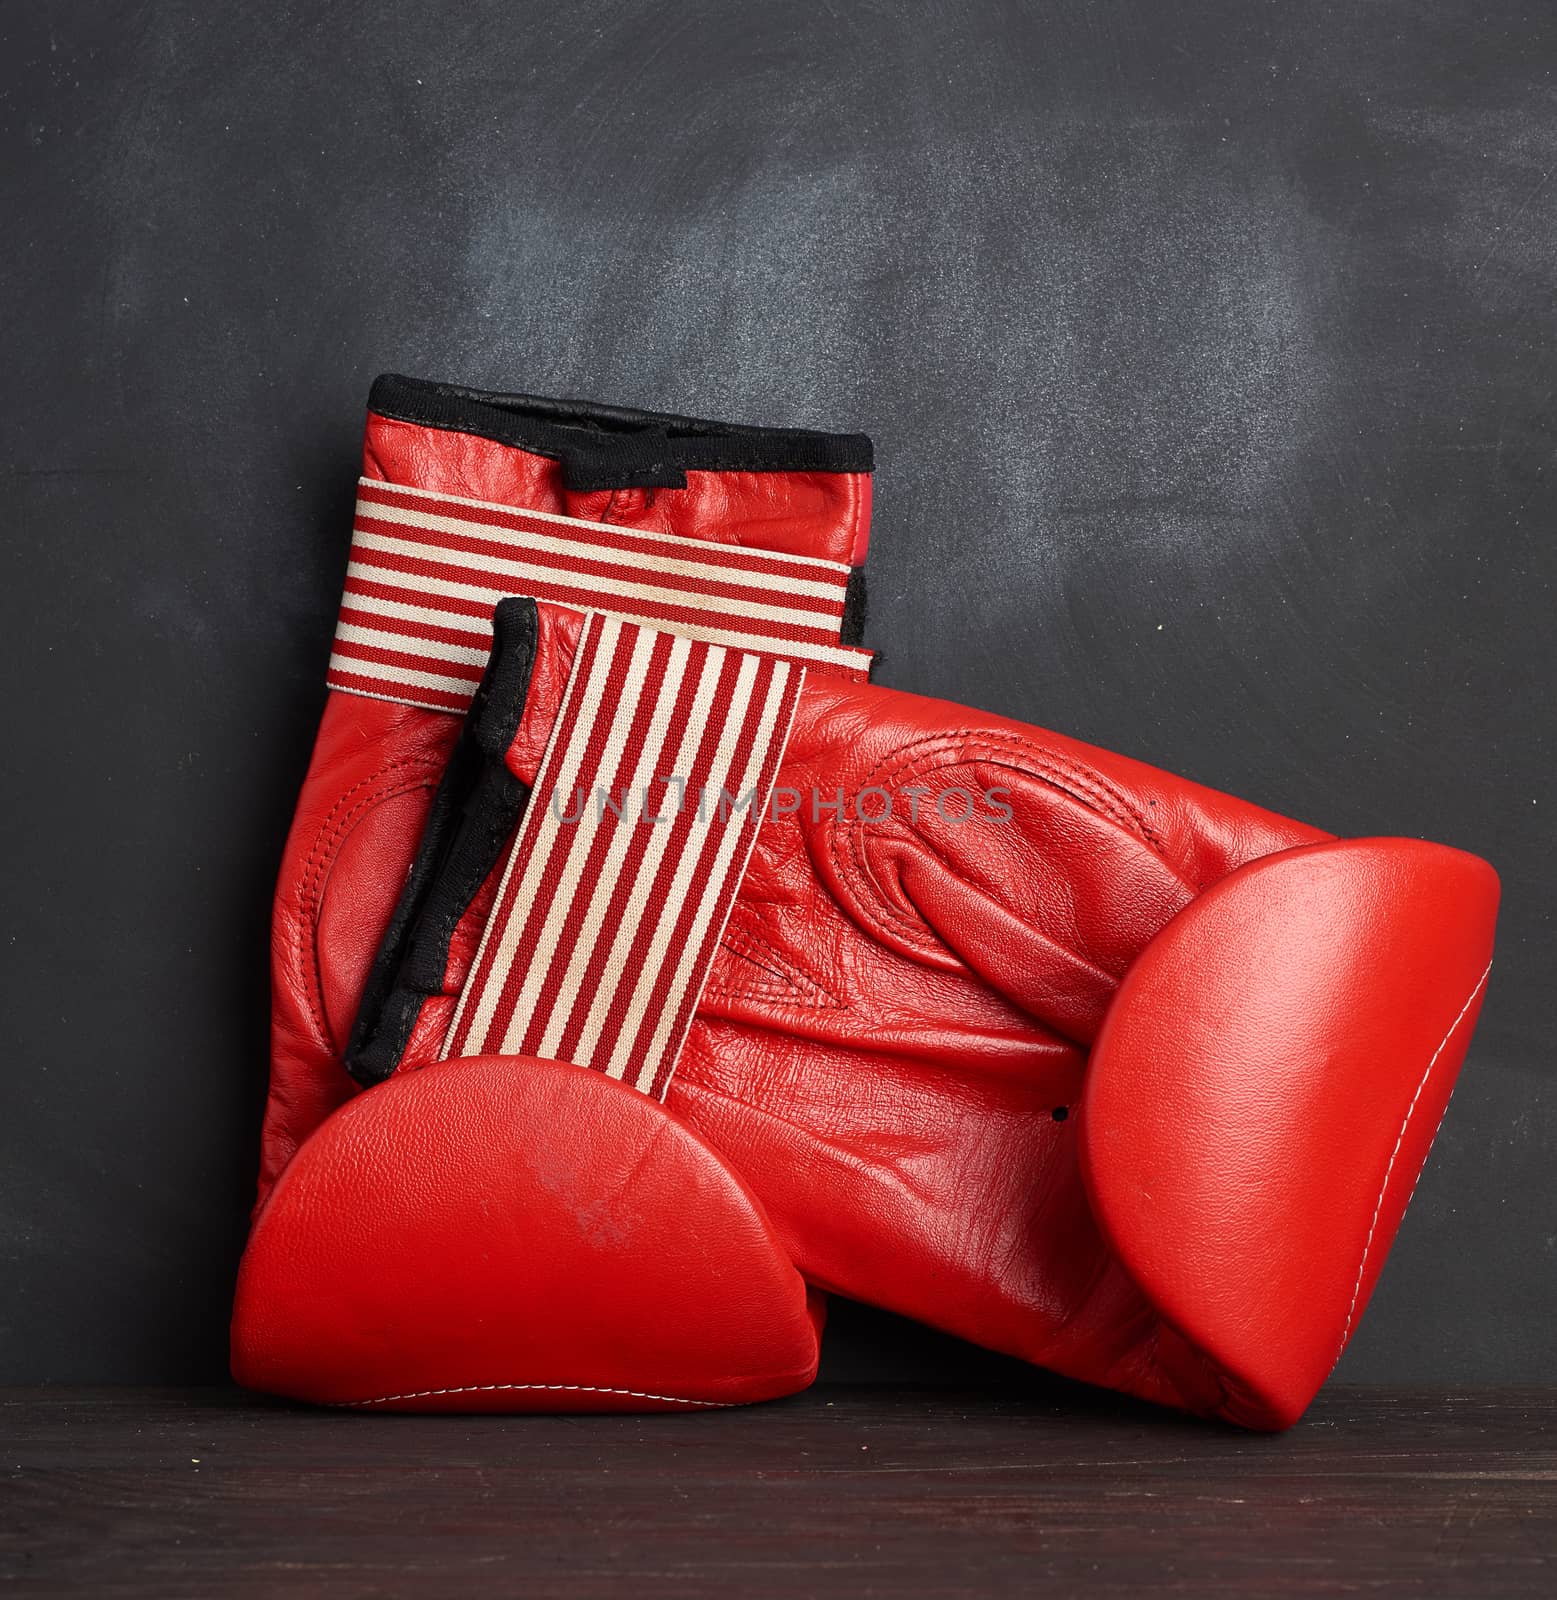 pair of red leather boxing gloves on a black background by ndanko